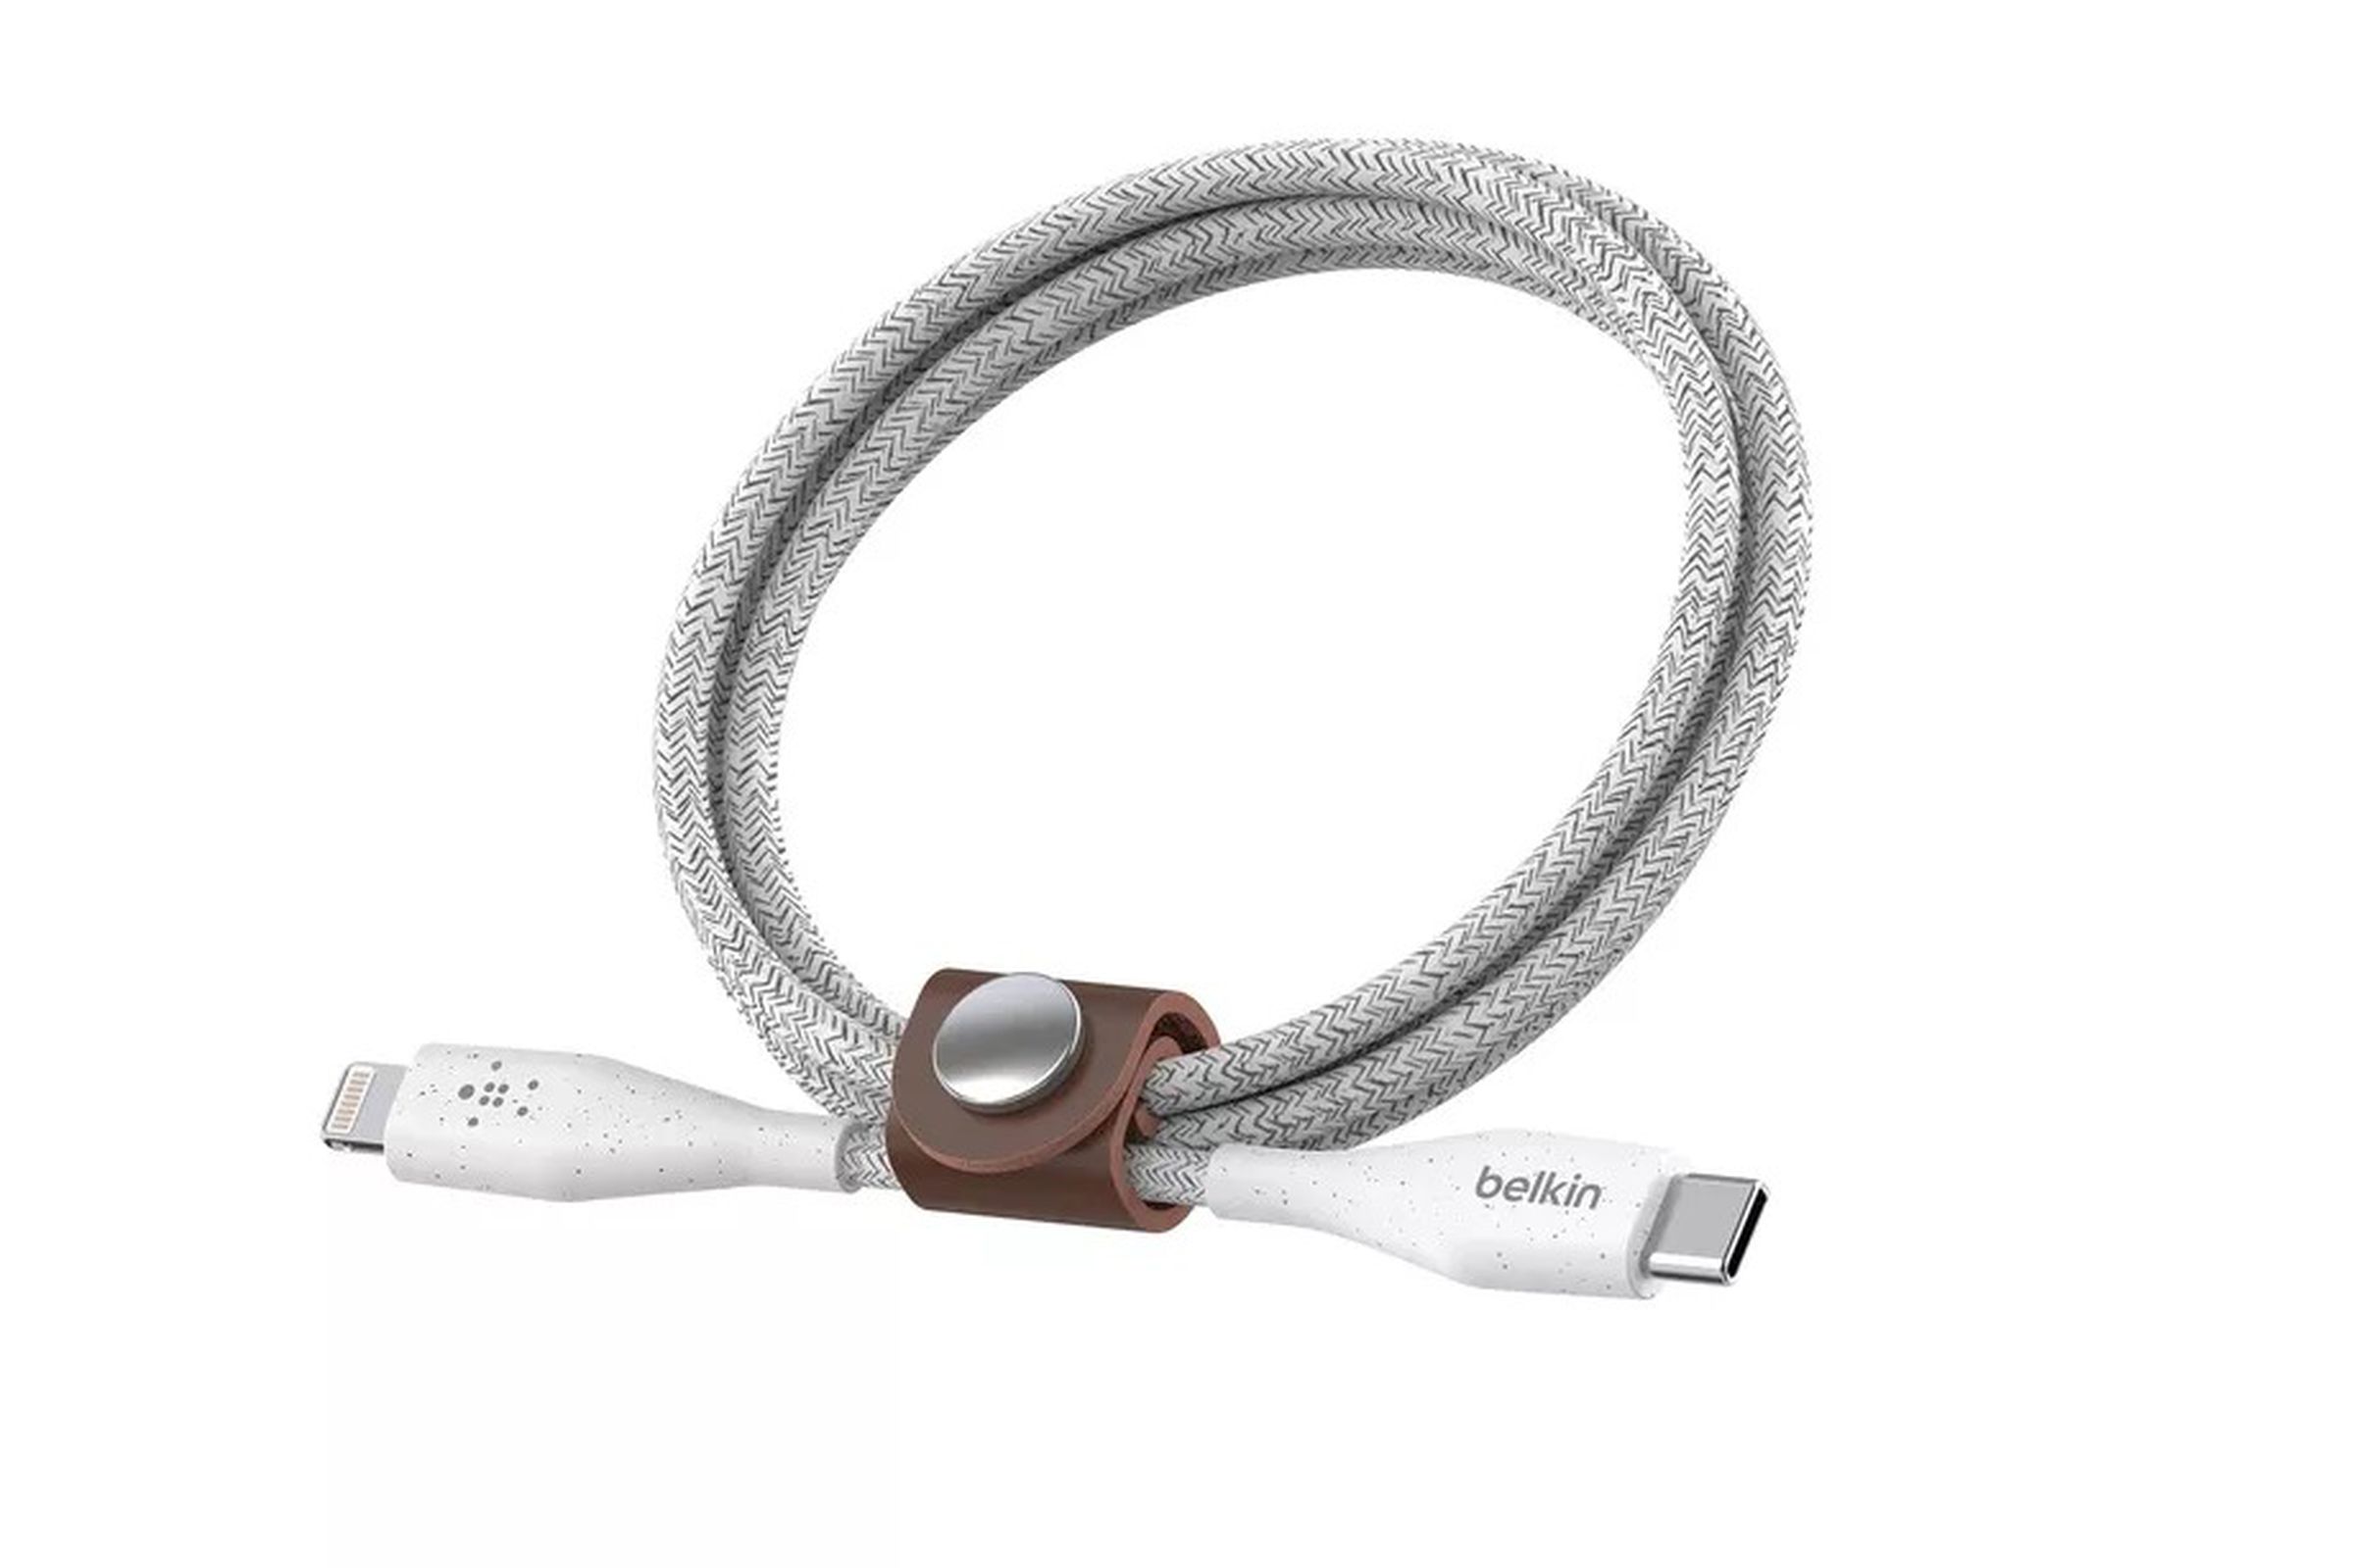 Third-party USB-C to Lightning cables, like this one from Belkin, are finally here.